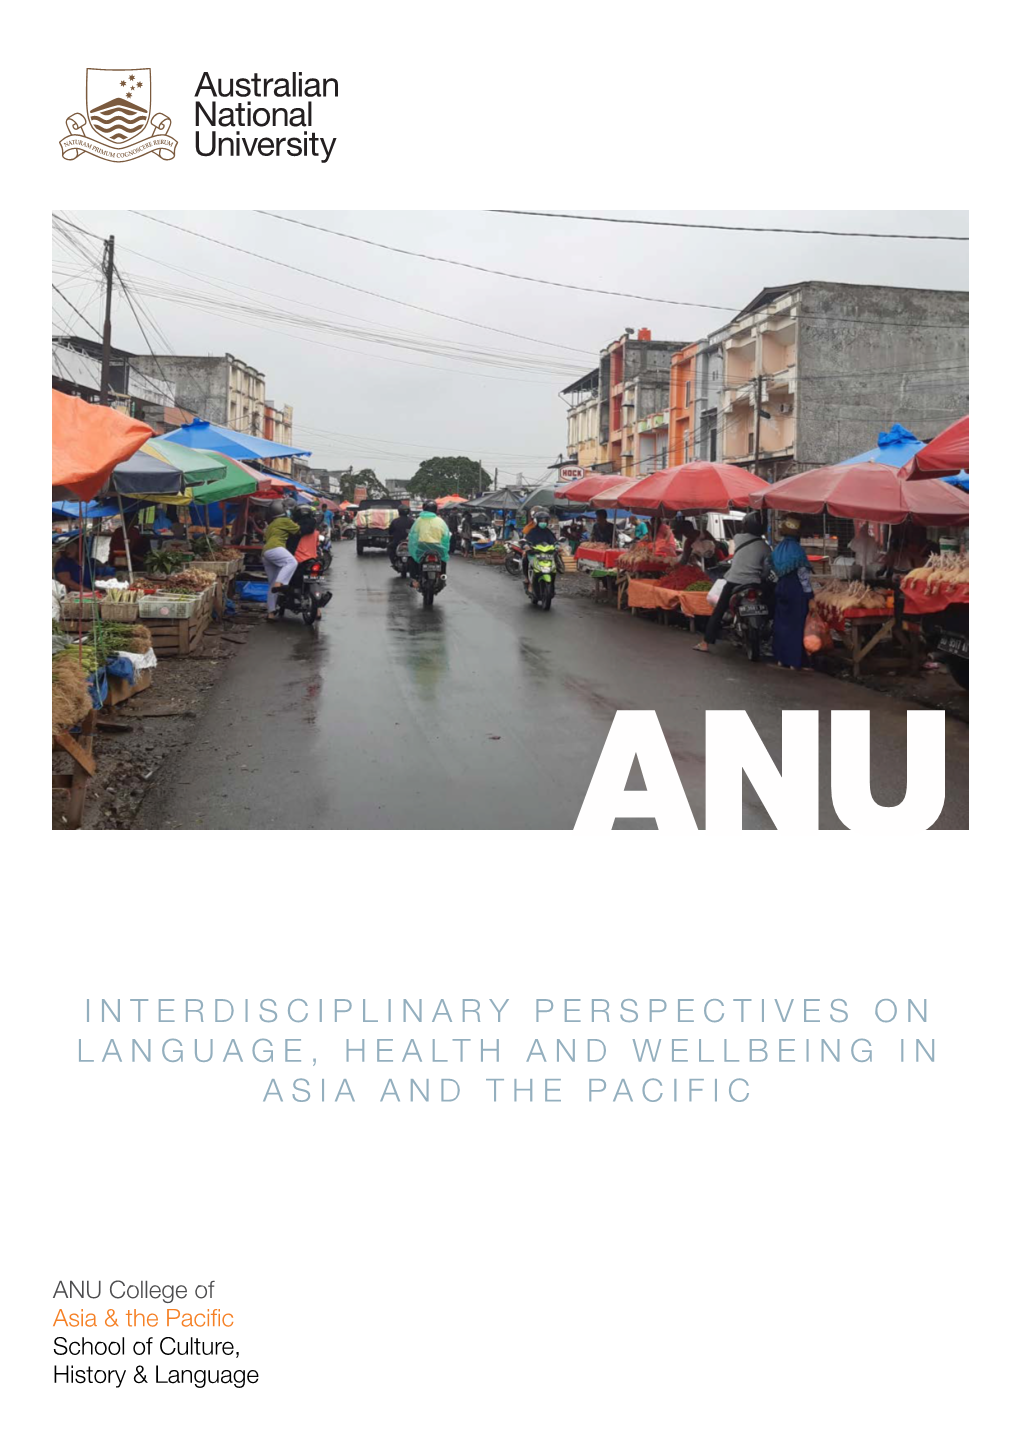 Interdisciplinary Perspectives on Language, Health and Wellbeing in Asia and the Pacific